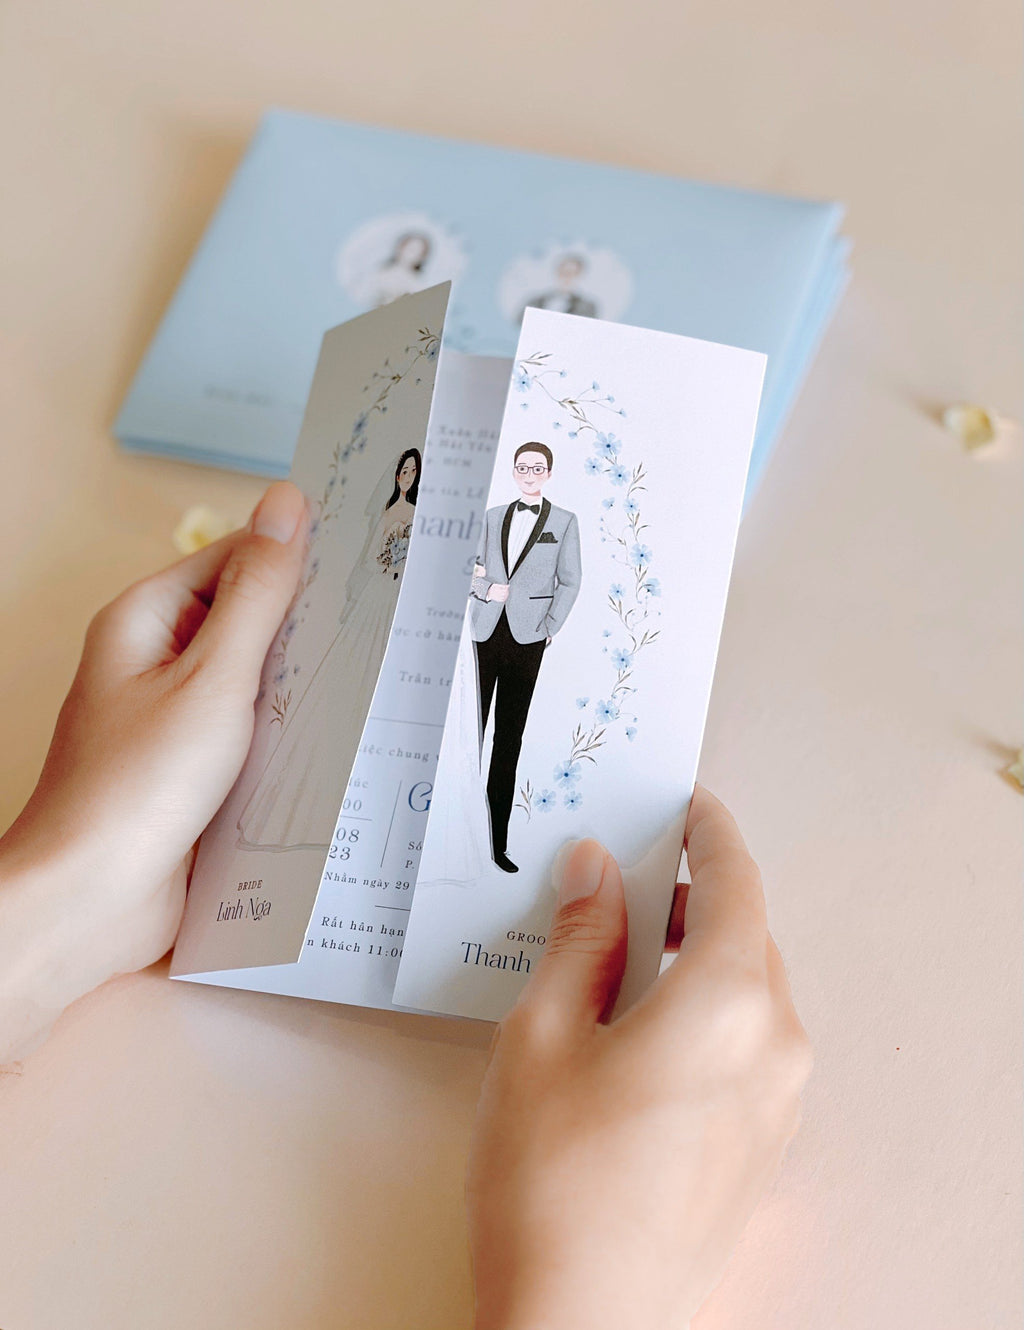 The Inside Of The Greeting Card 